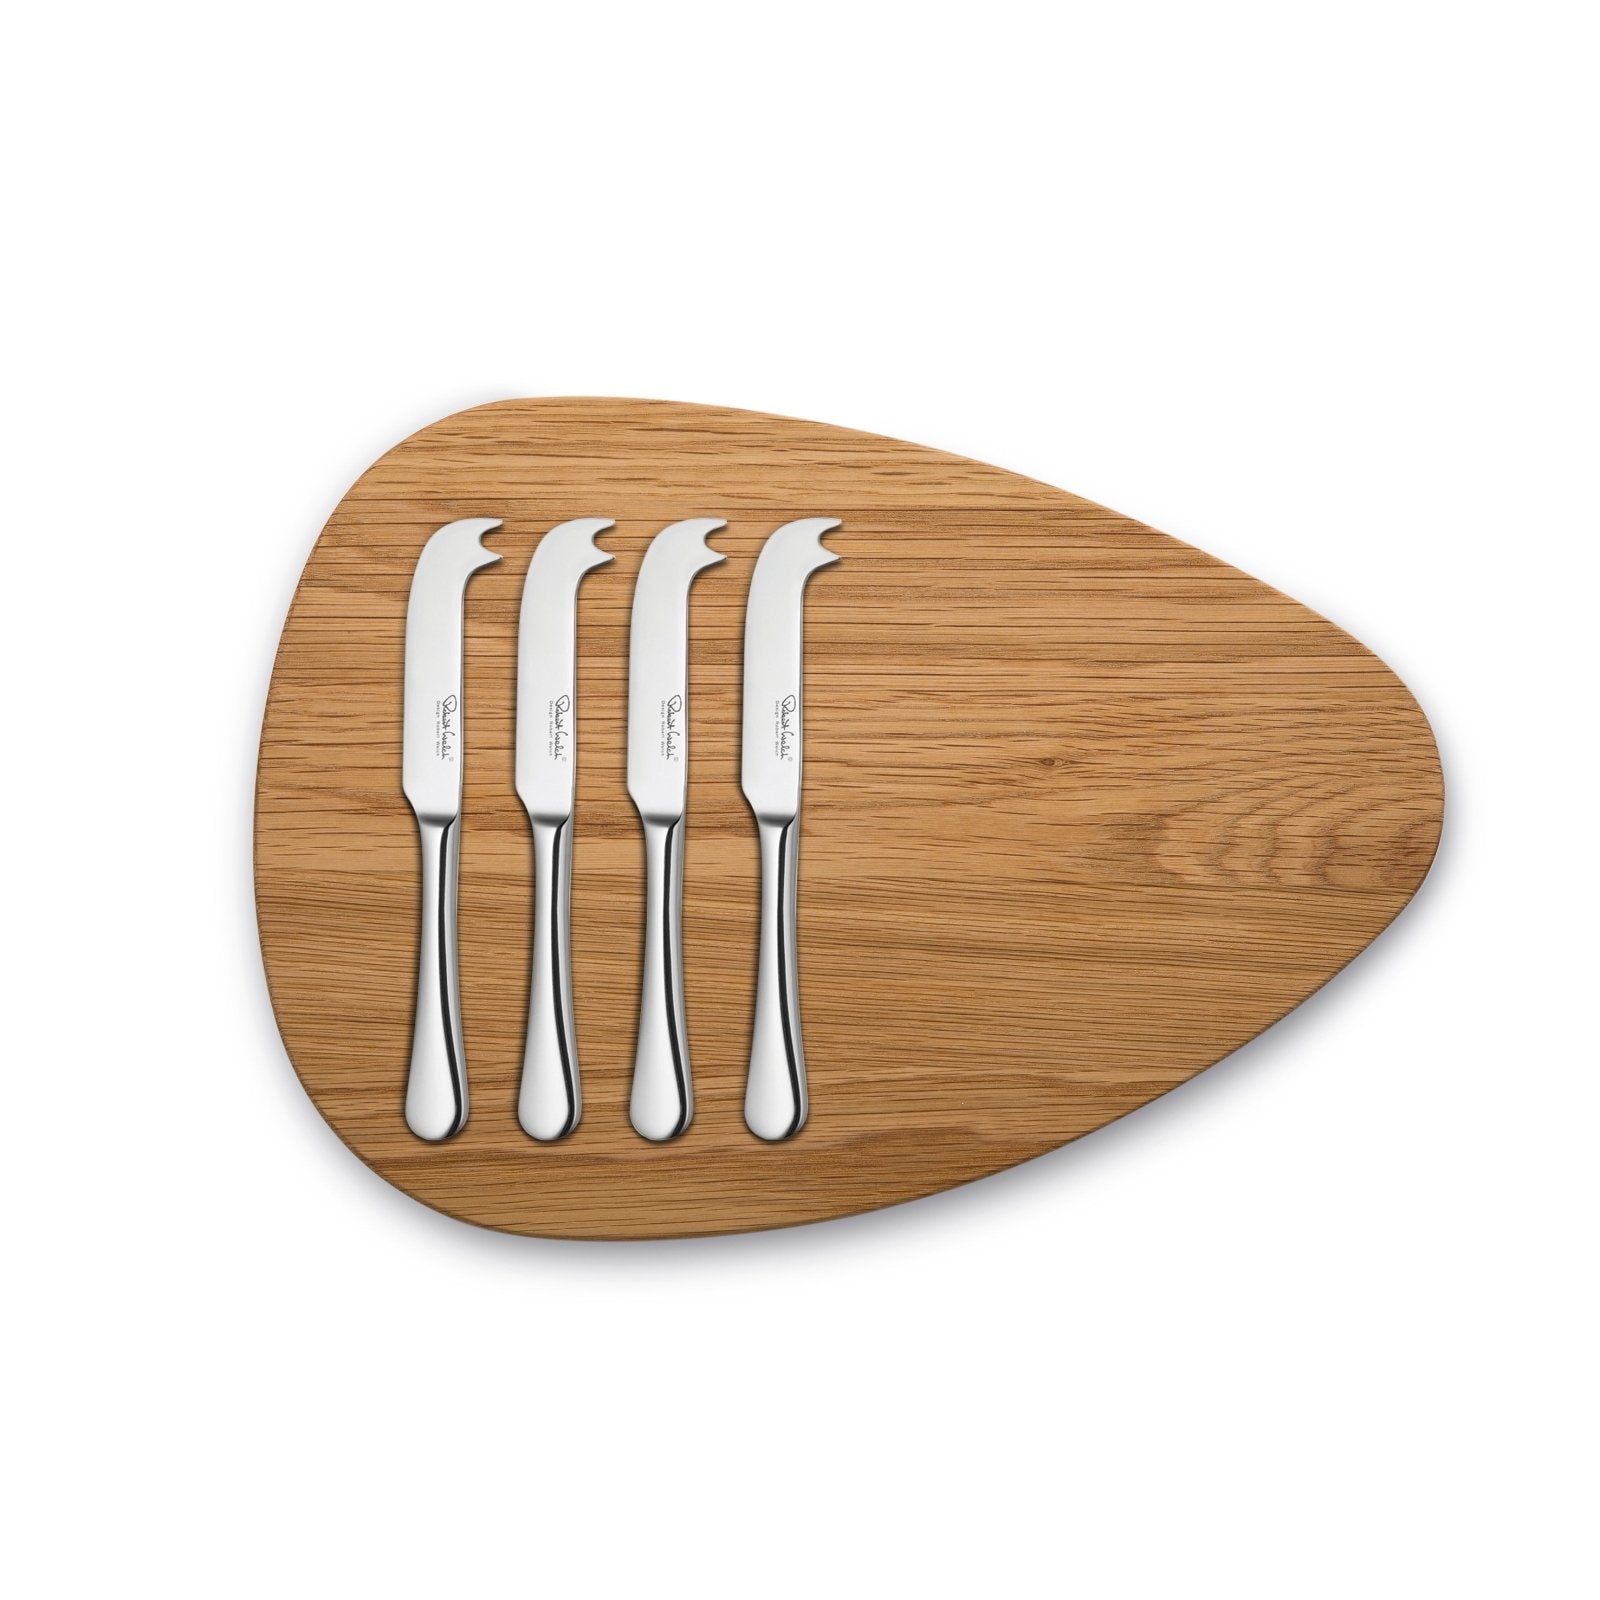 Robert Welch Cheese Serving Set with Oak Board - RADBR10SPEC2 - The Cotswold Knife Company